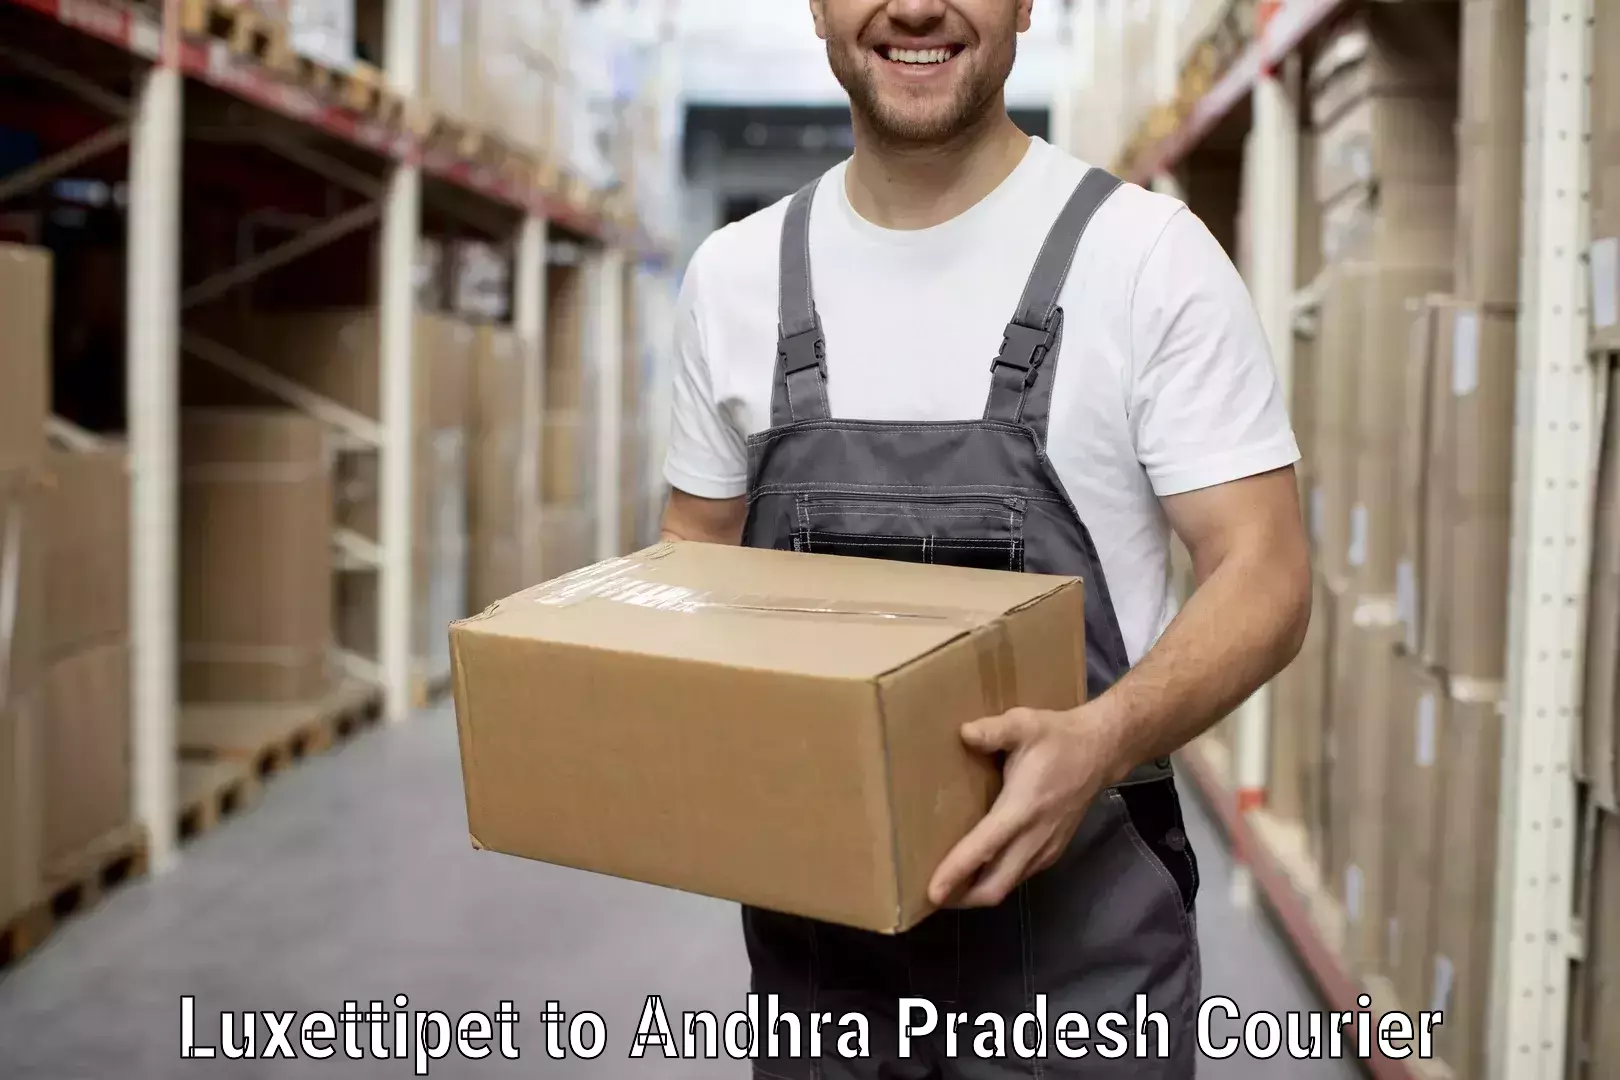 Quality relocation assistance Luxettipet to Visakhapatnam